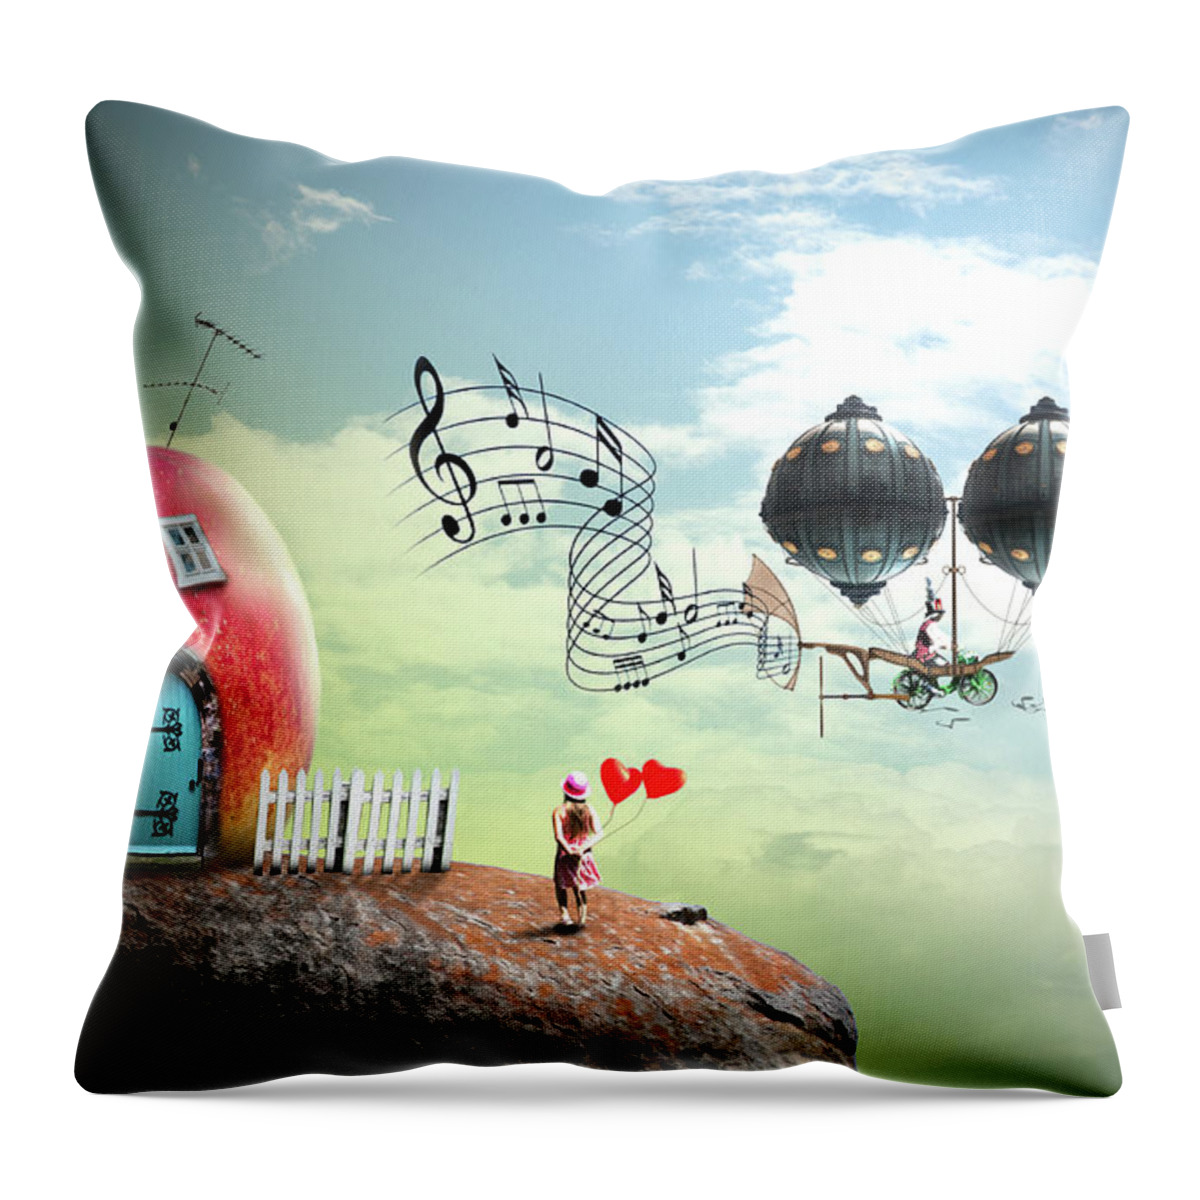 Balloon Throw Pillow featuring the digital art Music Traveler by Nathan Wright